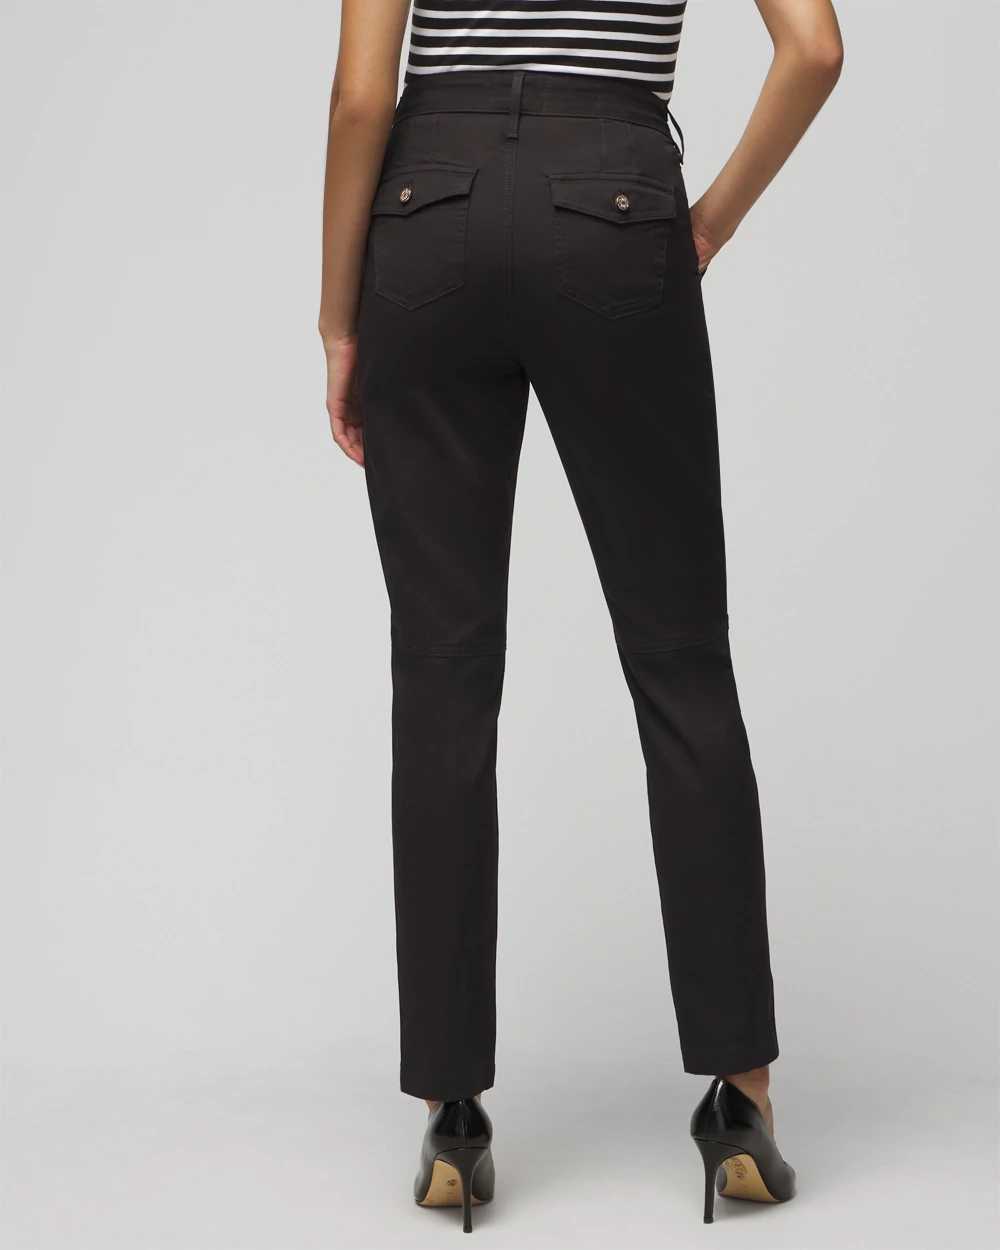 High-Rise Pret-A-Jet Slim Ankle Pants click to view larger image.